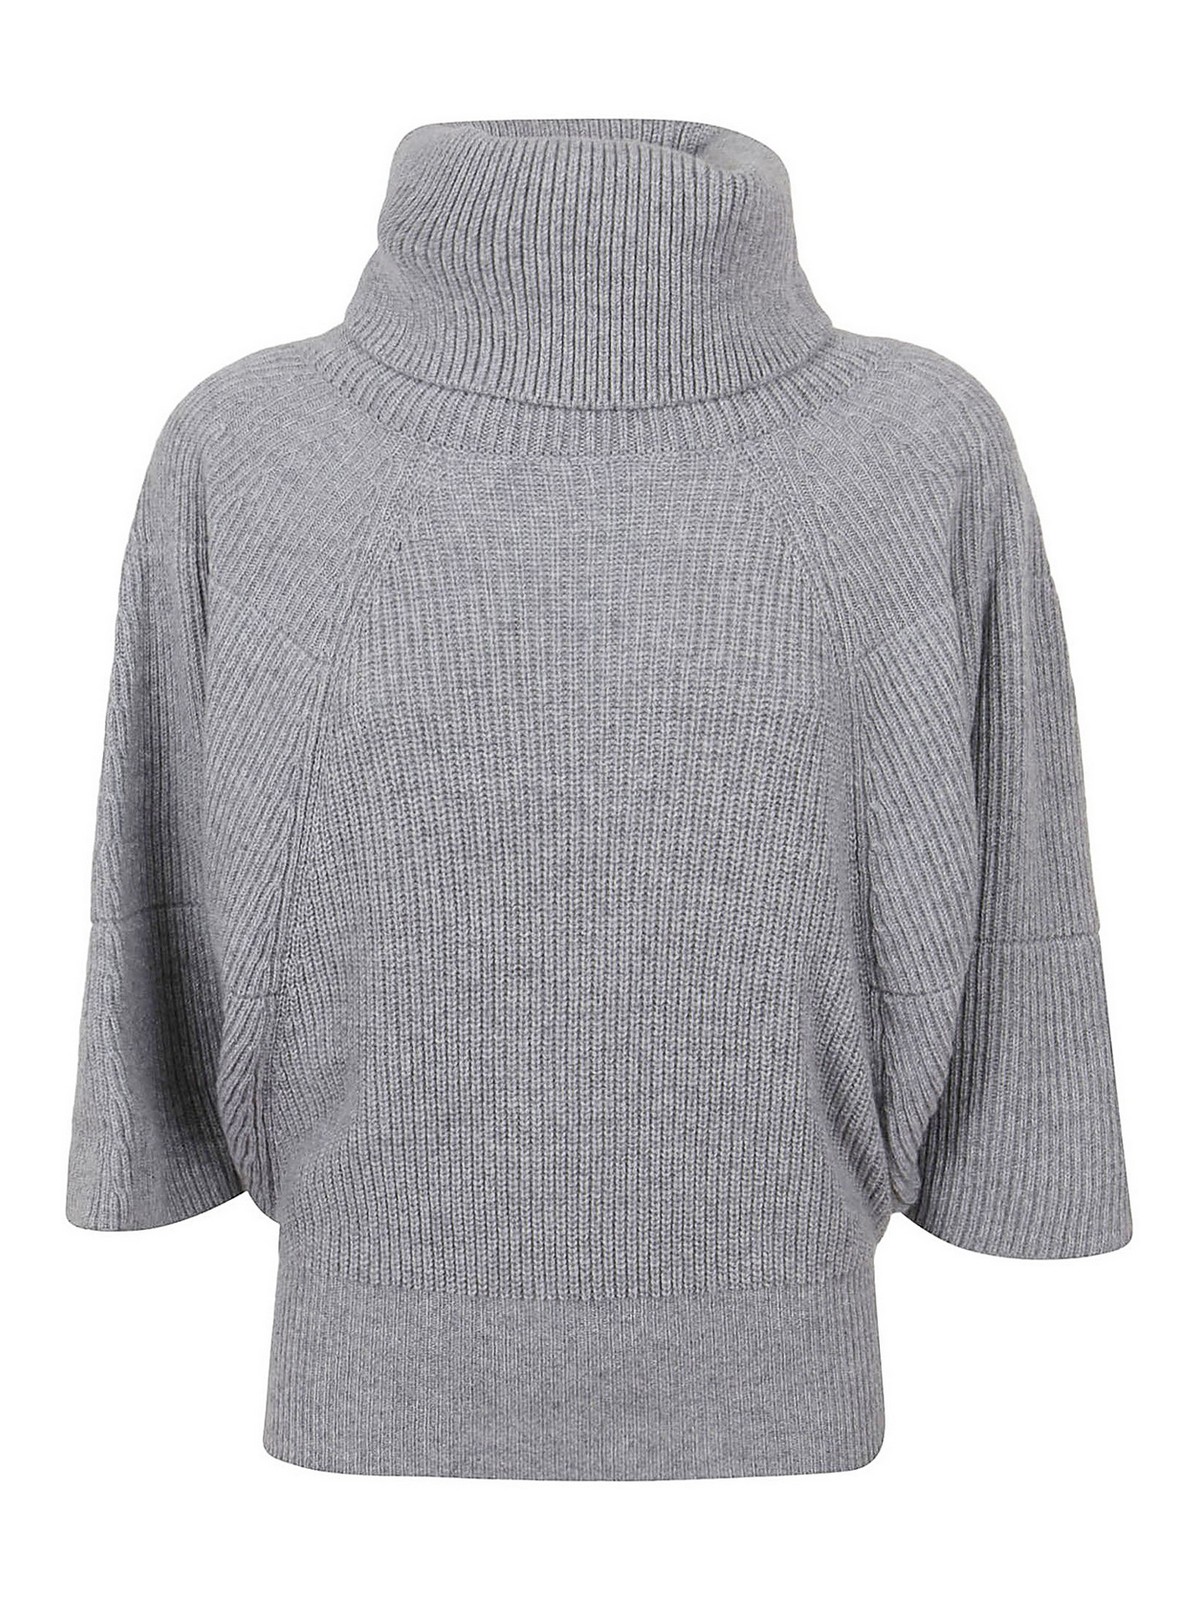 Givenchy - Cashmere turtleneck sweater 